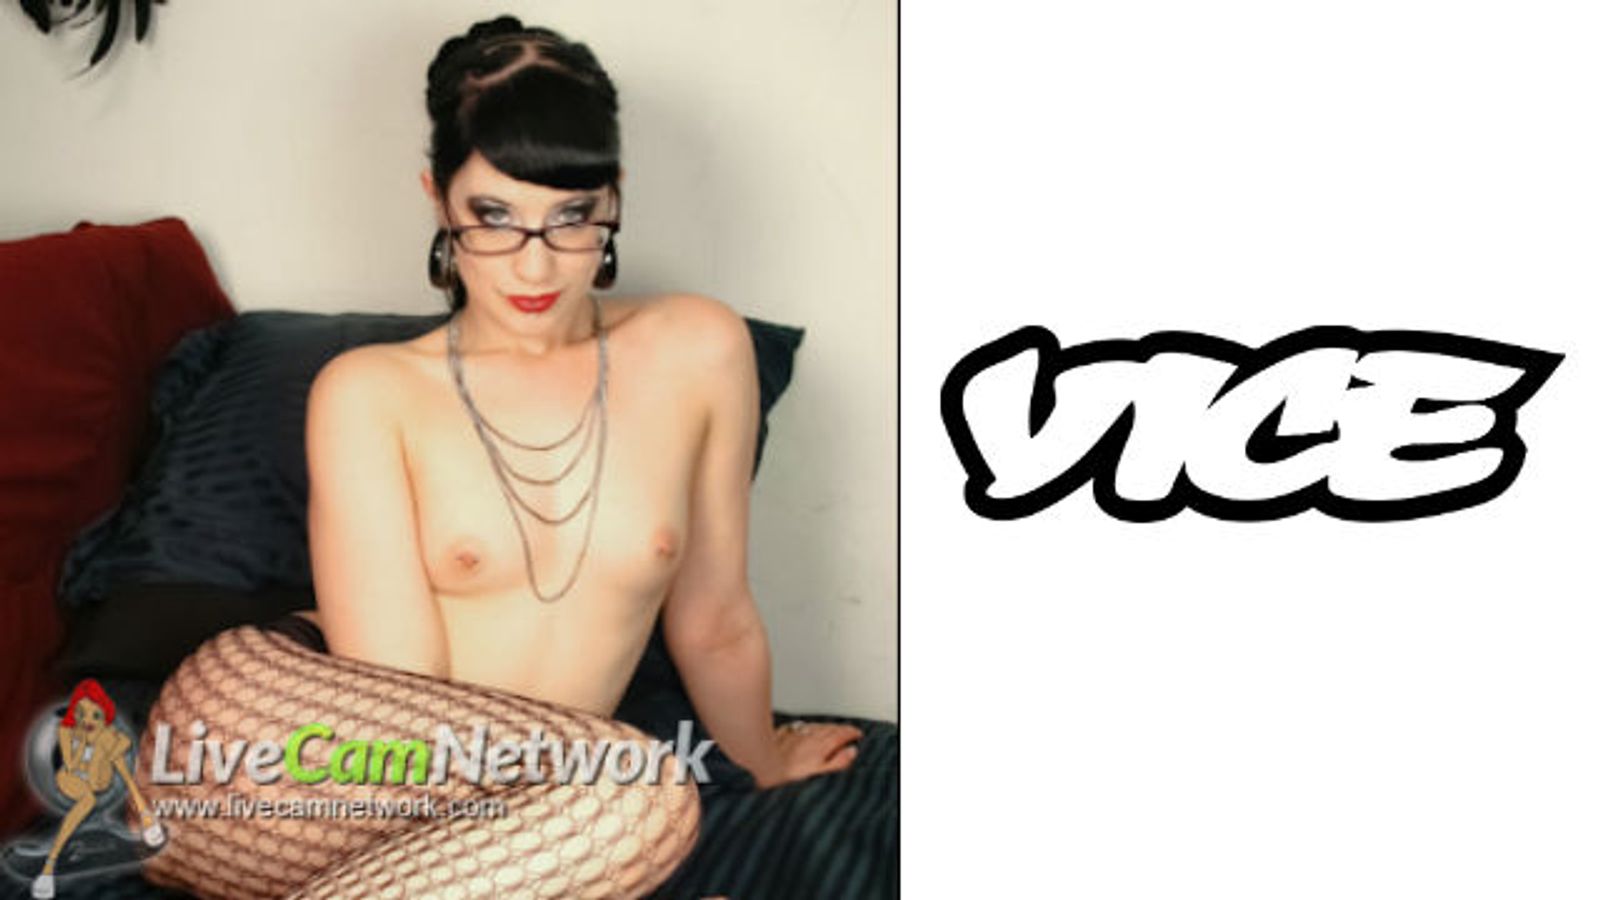 LiveCamNetwork Cam Girl in Vice.com Fashion Feature